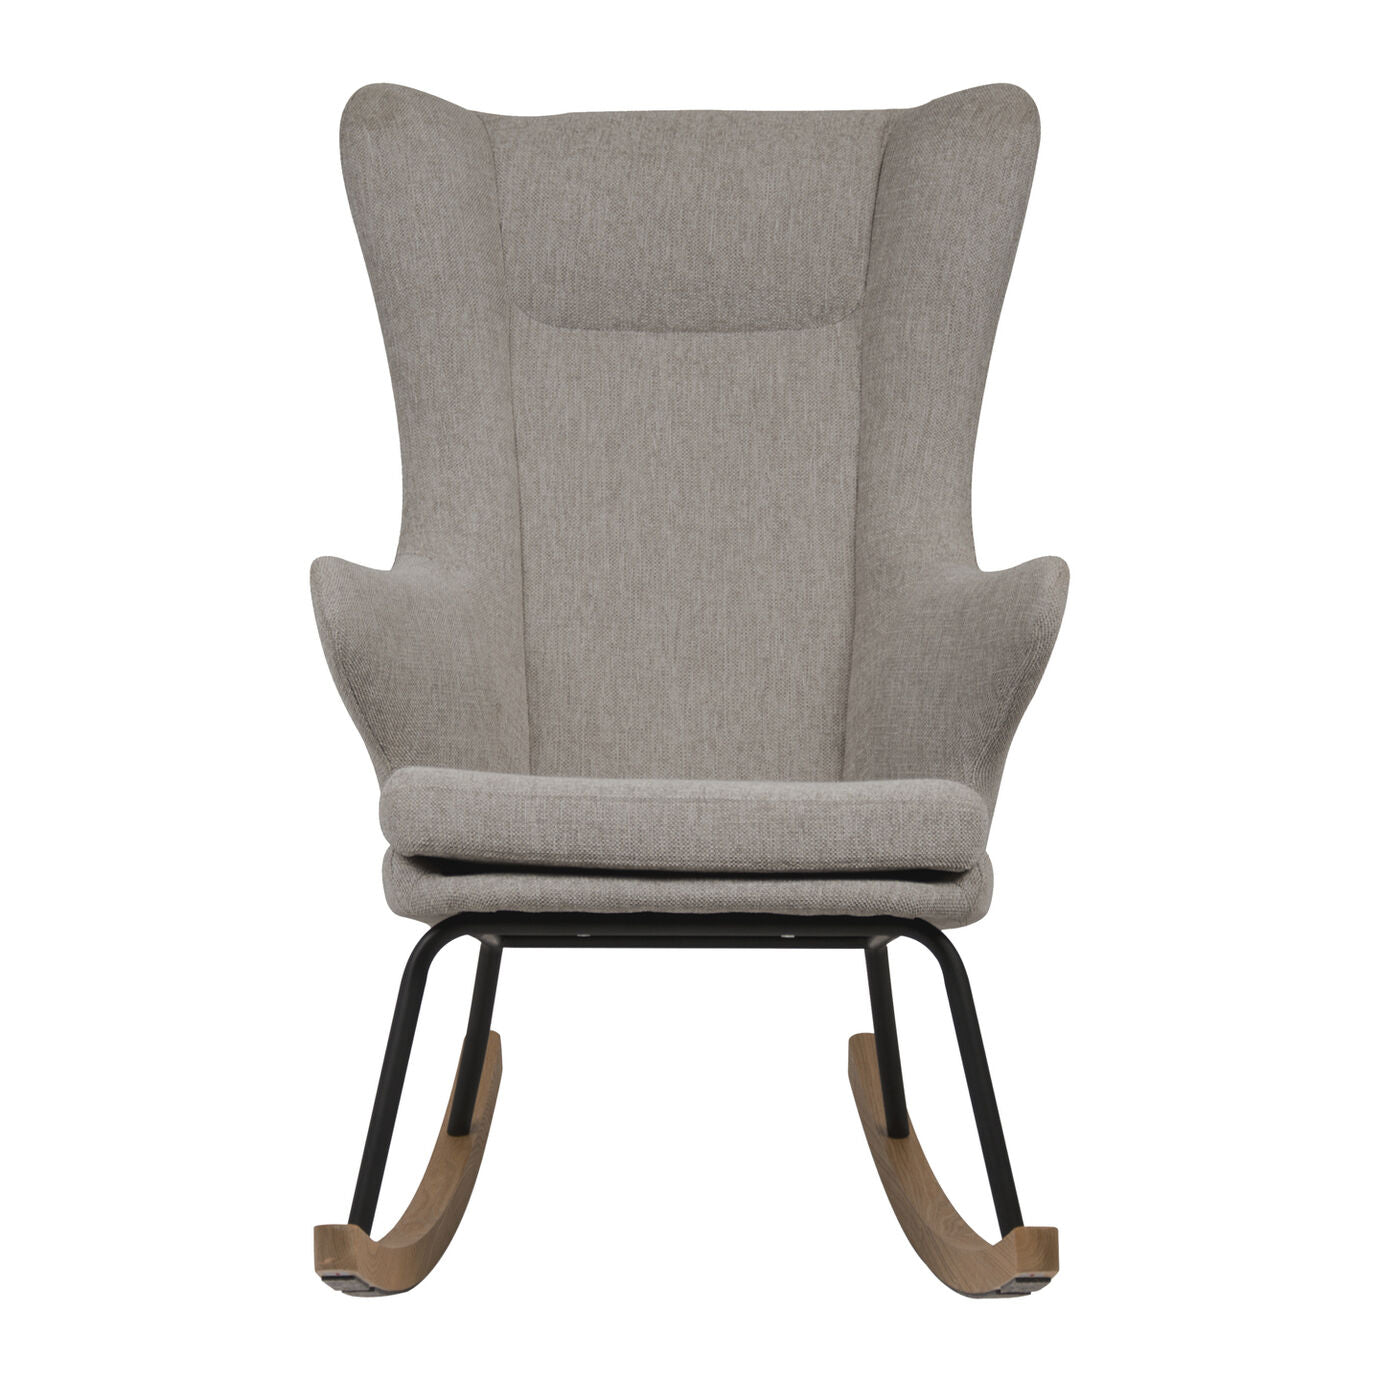 Quax - Rocking Adult Chair De Luxe - Sand Grey